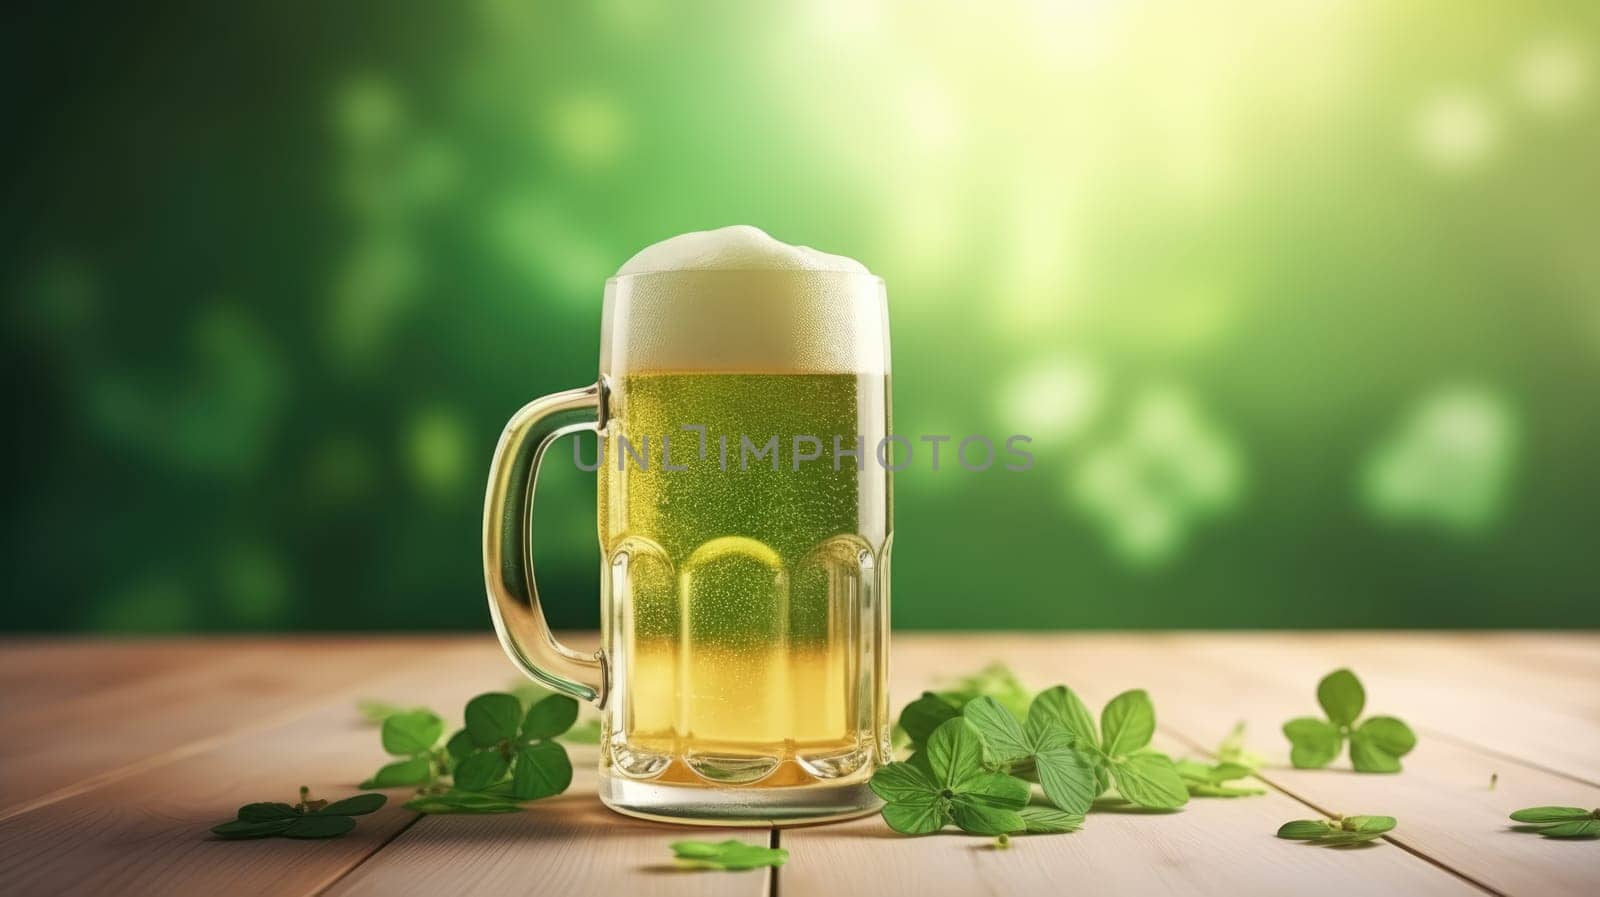 Cold Beer with foam in a mug with Four-Leaf Clovers on green background, St. Patricks Day Celebration by JuliaDorian